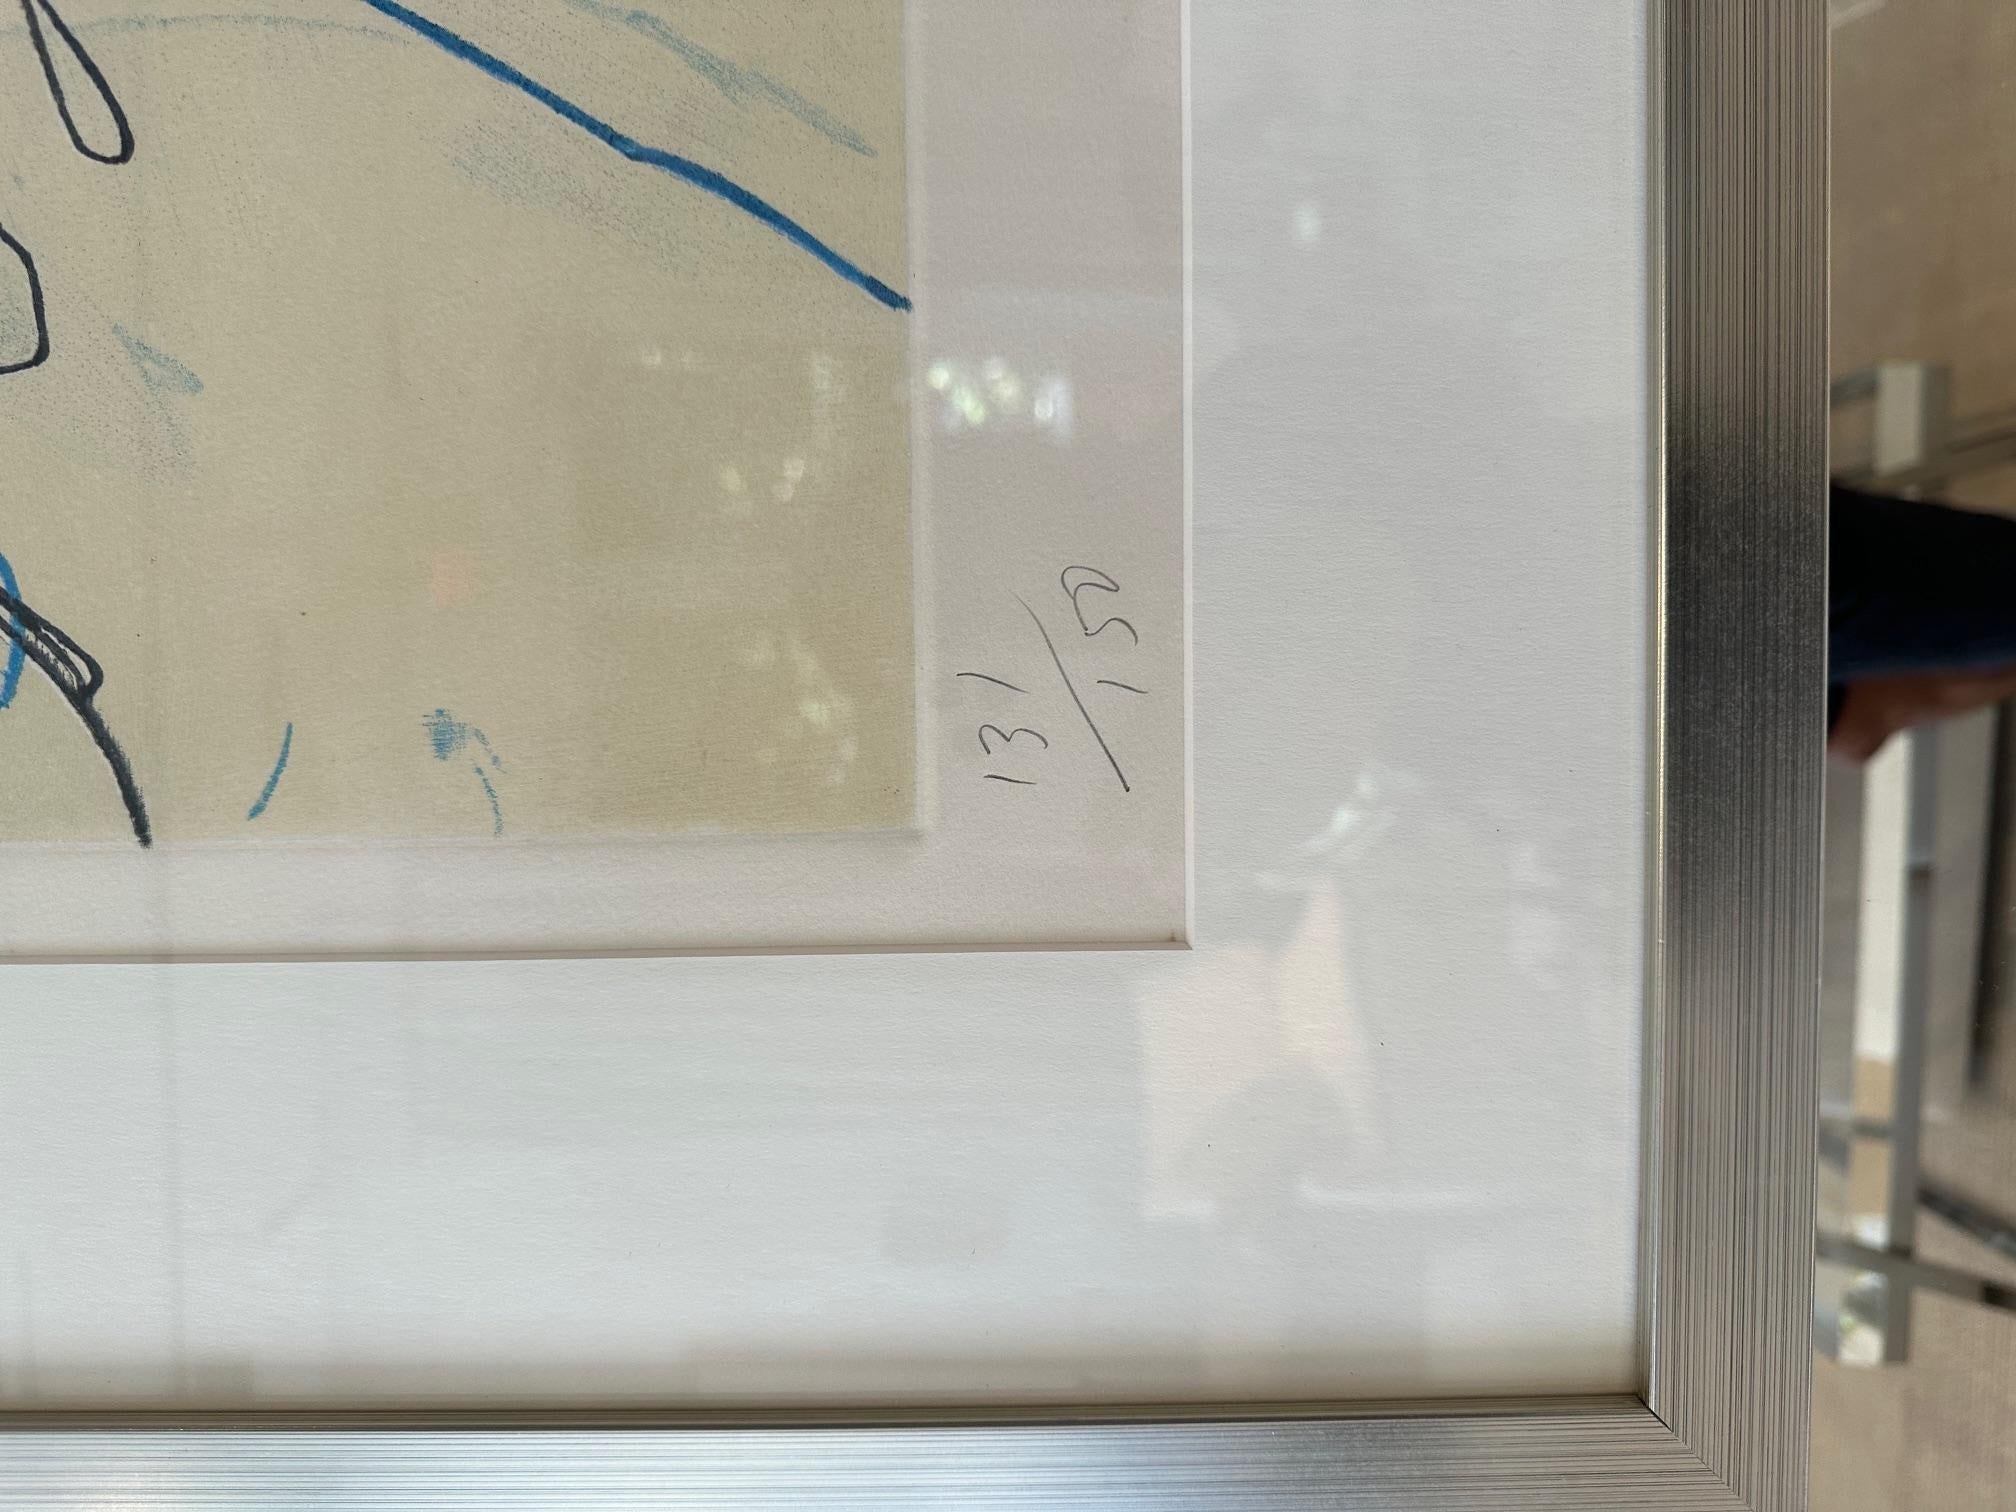 CY Twombly Sarajevo Winter Olympics 1984 In Excellent Condition For Sale In New York, NY